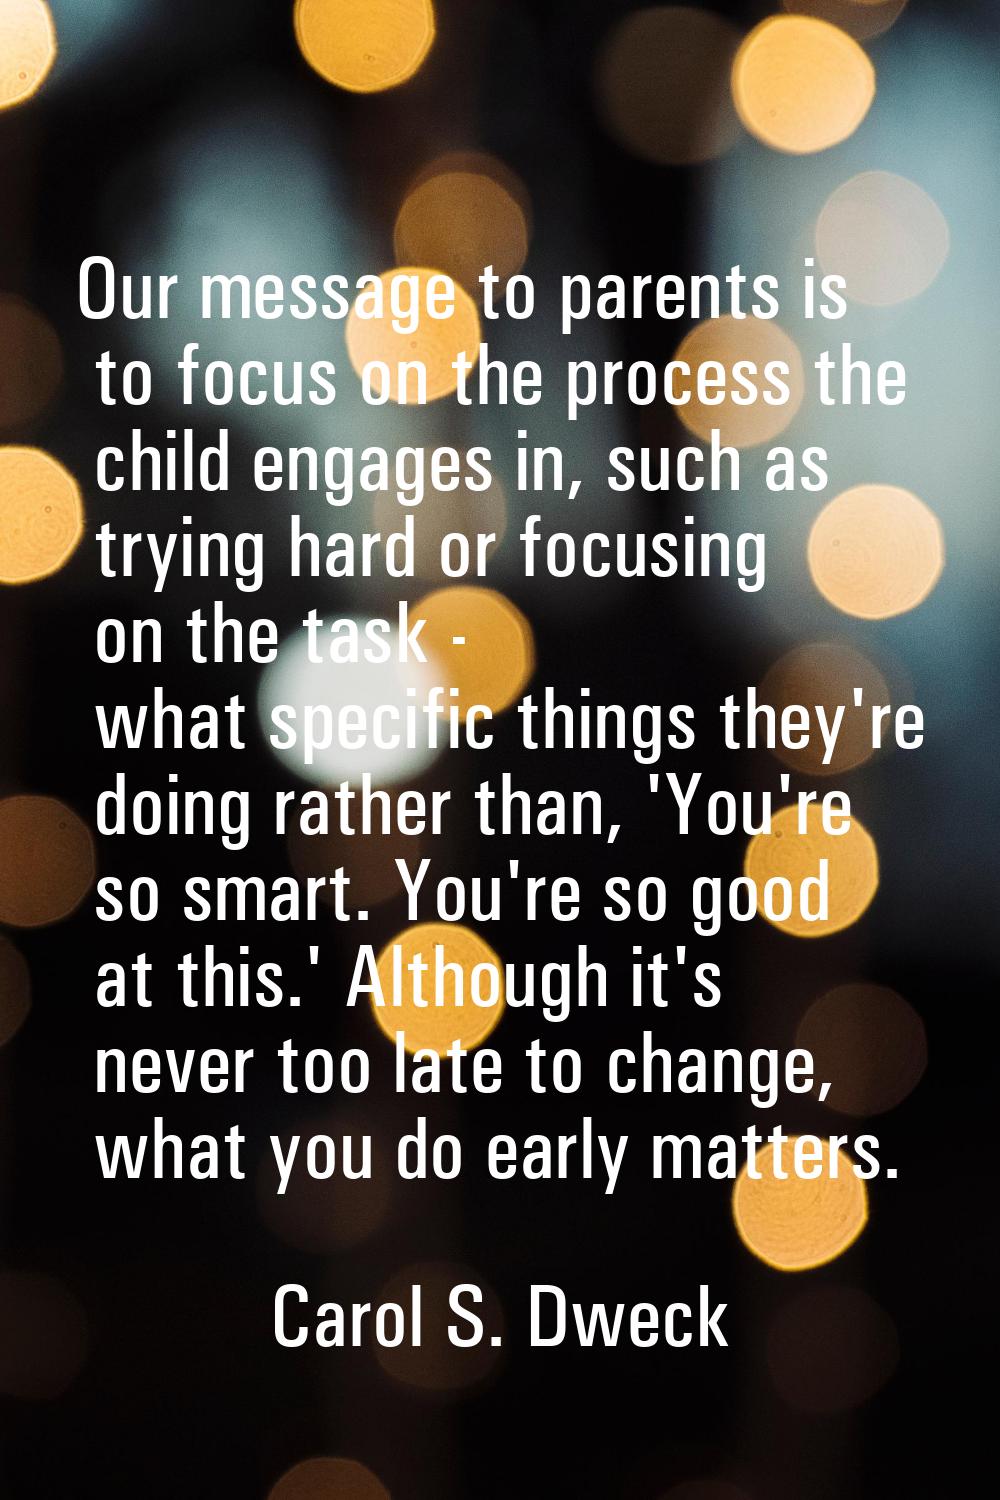 Our message to parents is to focus on the process the child engages in, such as trying hard or focu